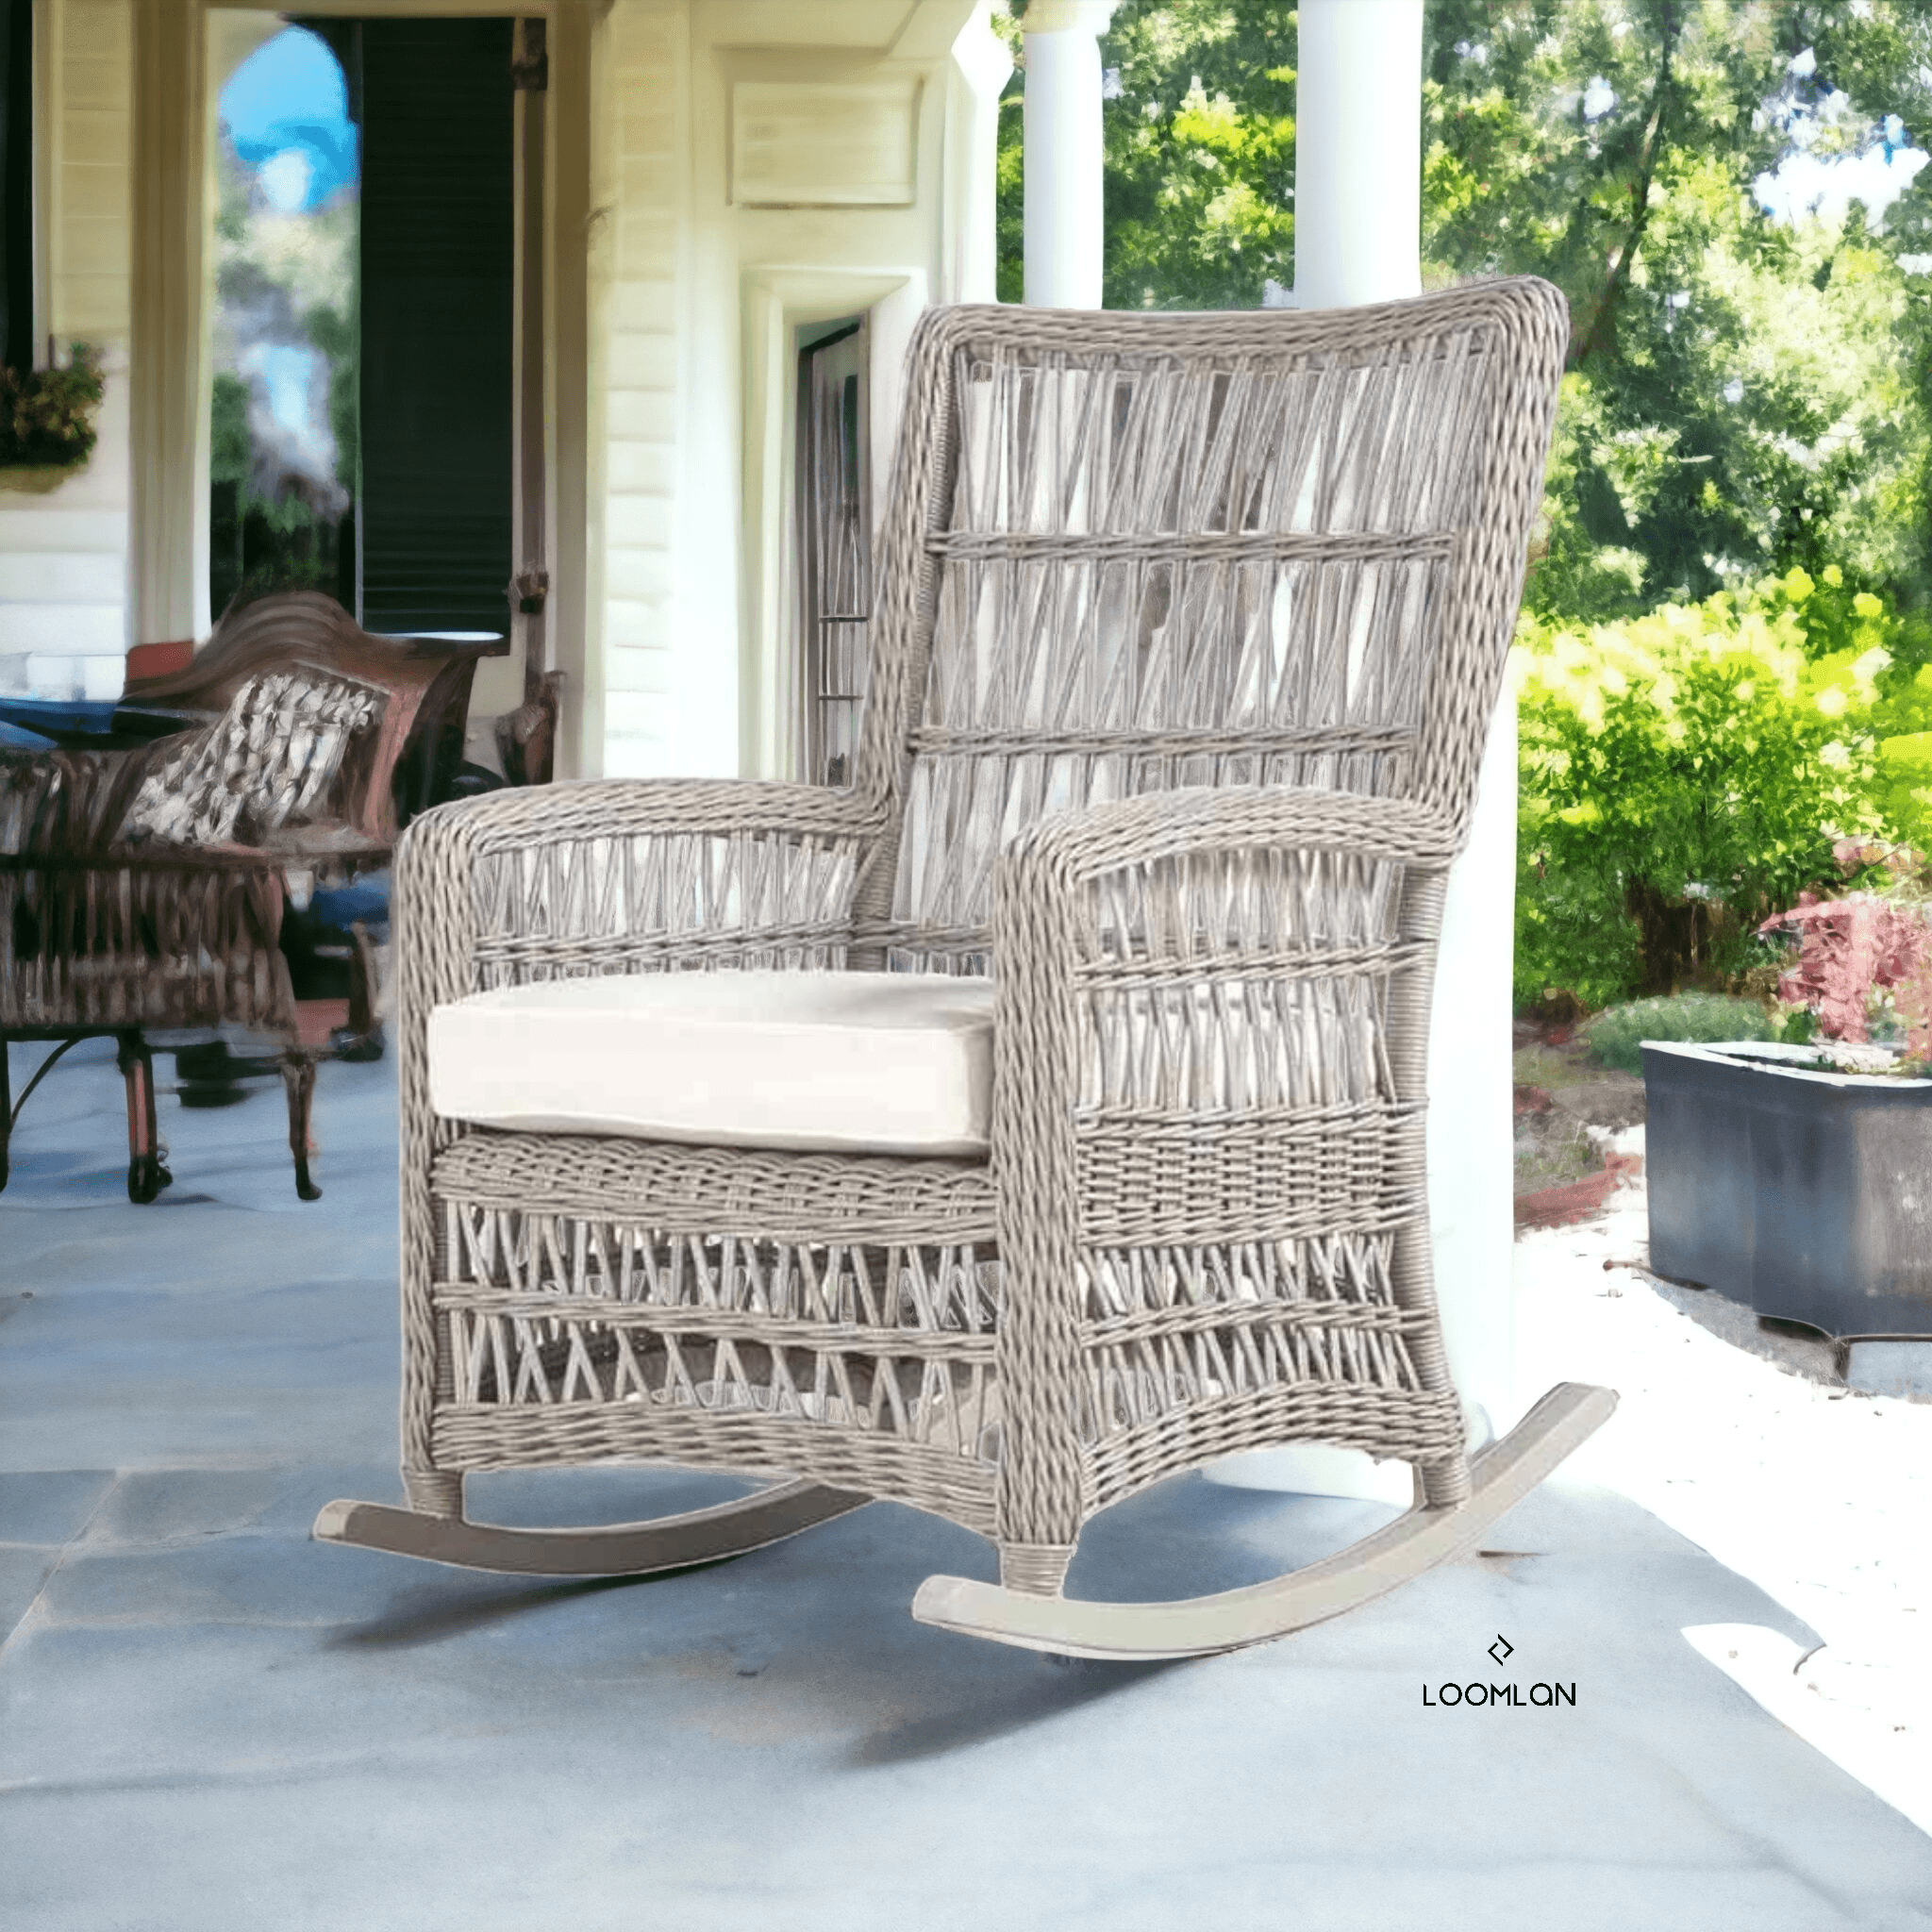 LOOMLAN Outdoor - Mackinac Wicker Rocking Porch Lounge Set With Cushions Lloyd Flanders - Outdoor Lounge Sets